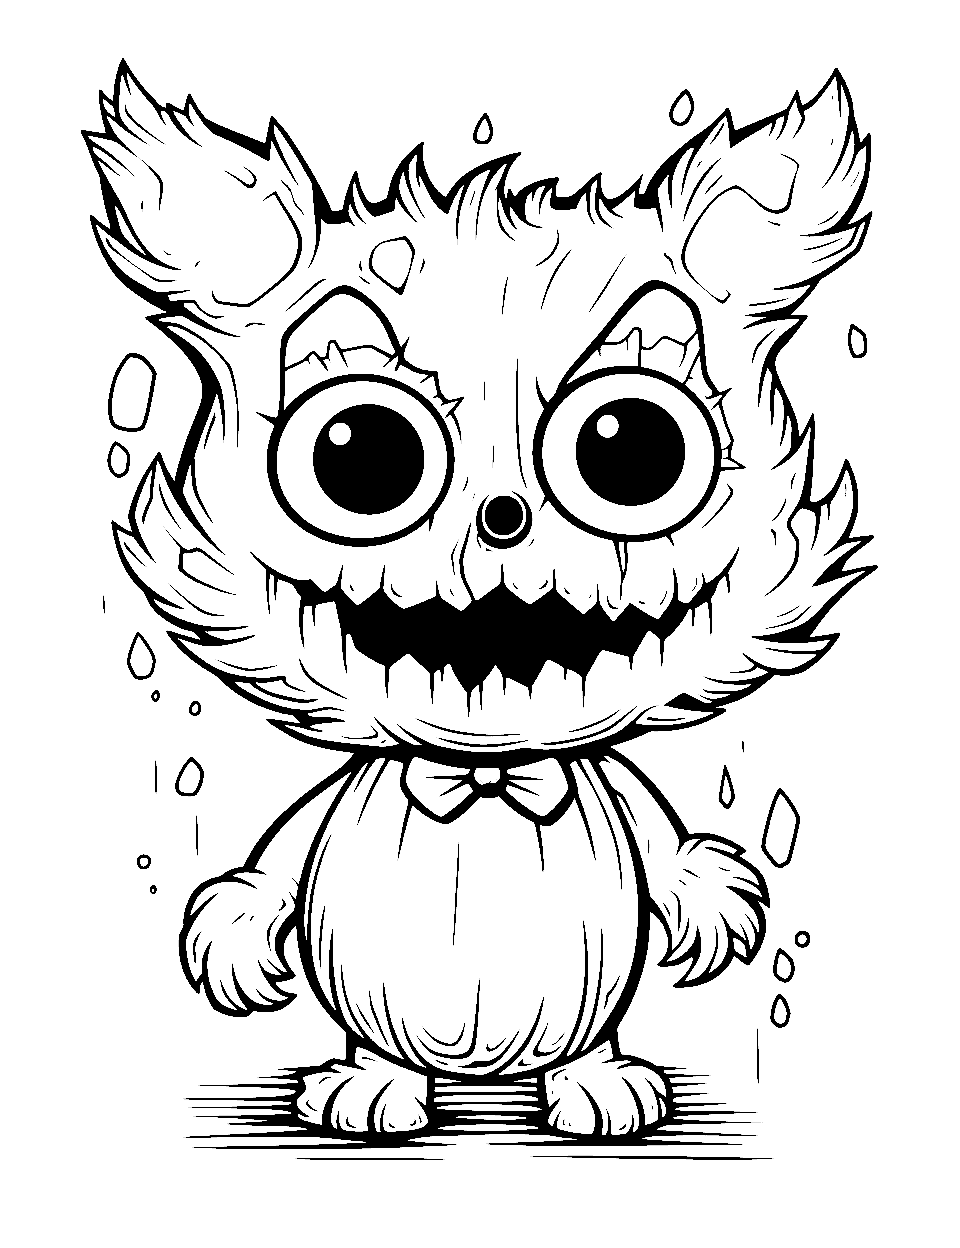 Five Nights At Freddy's Coloring Pages Printable for Free Download